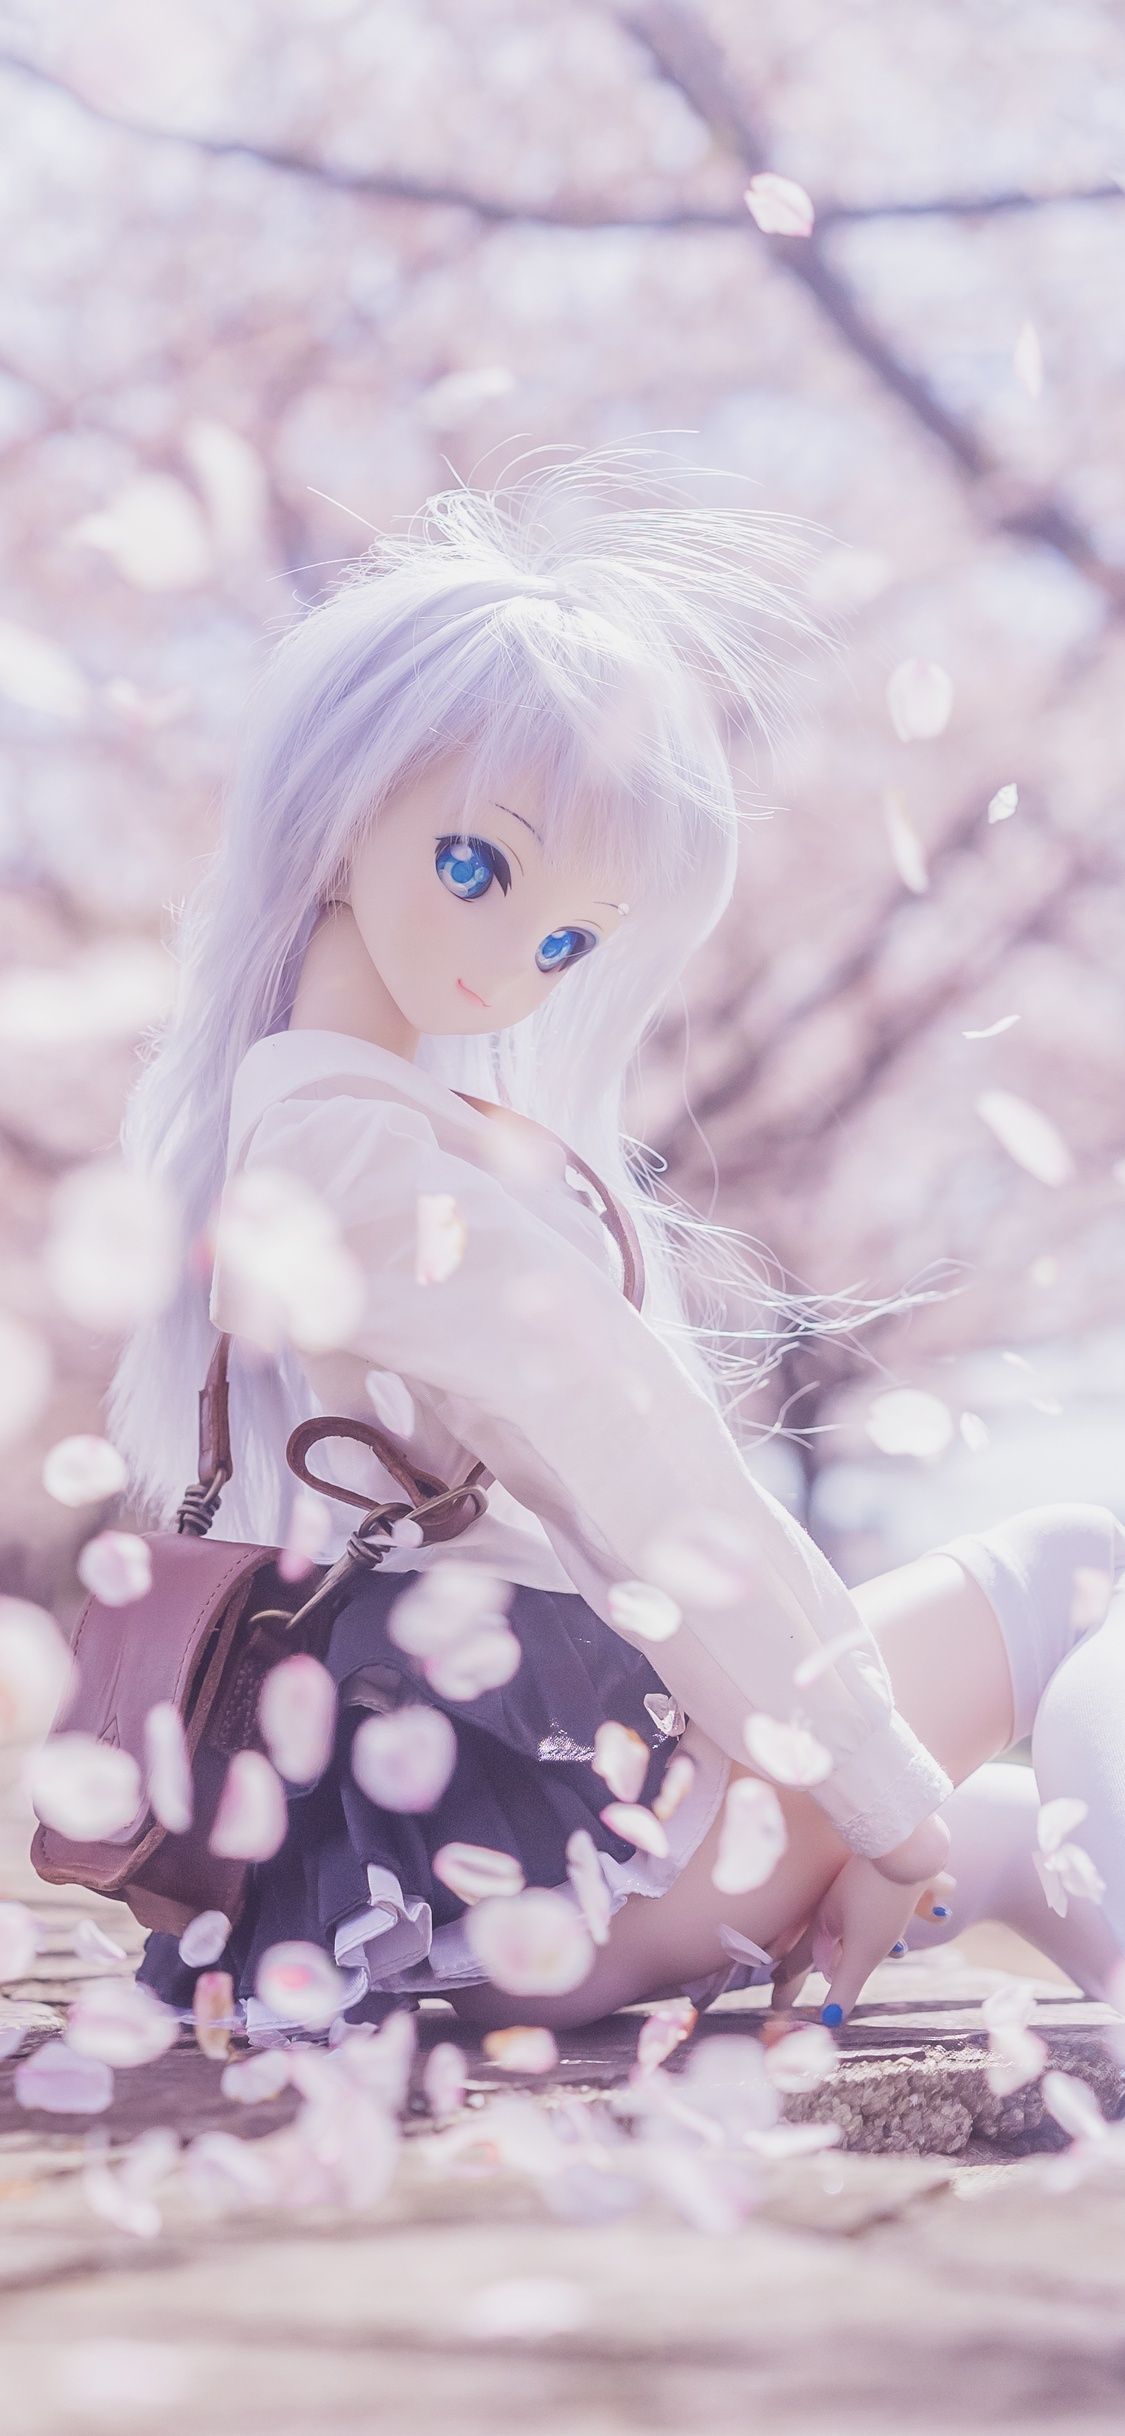 Anime Doll Wallpapers - Wallpaper Cave